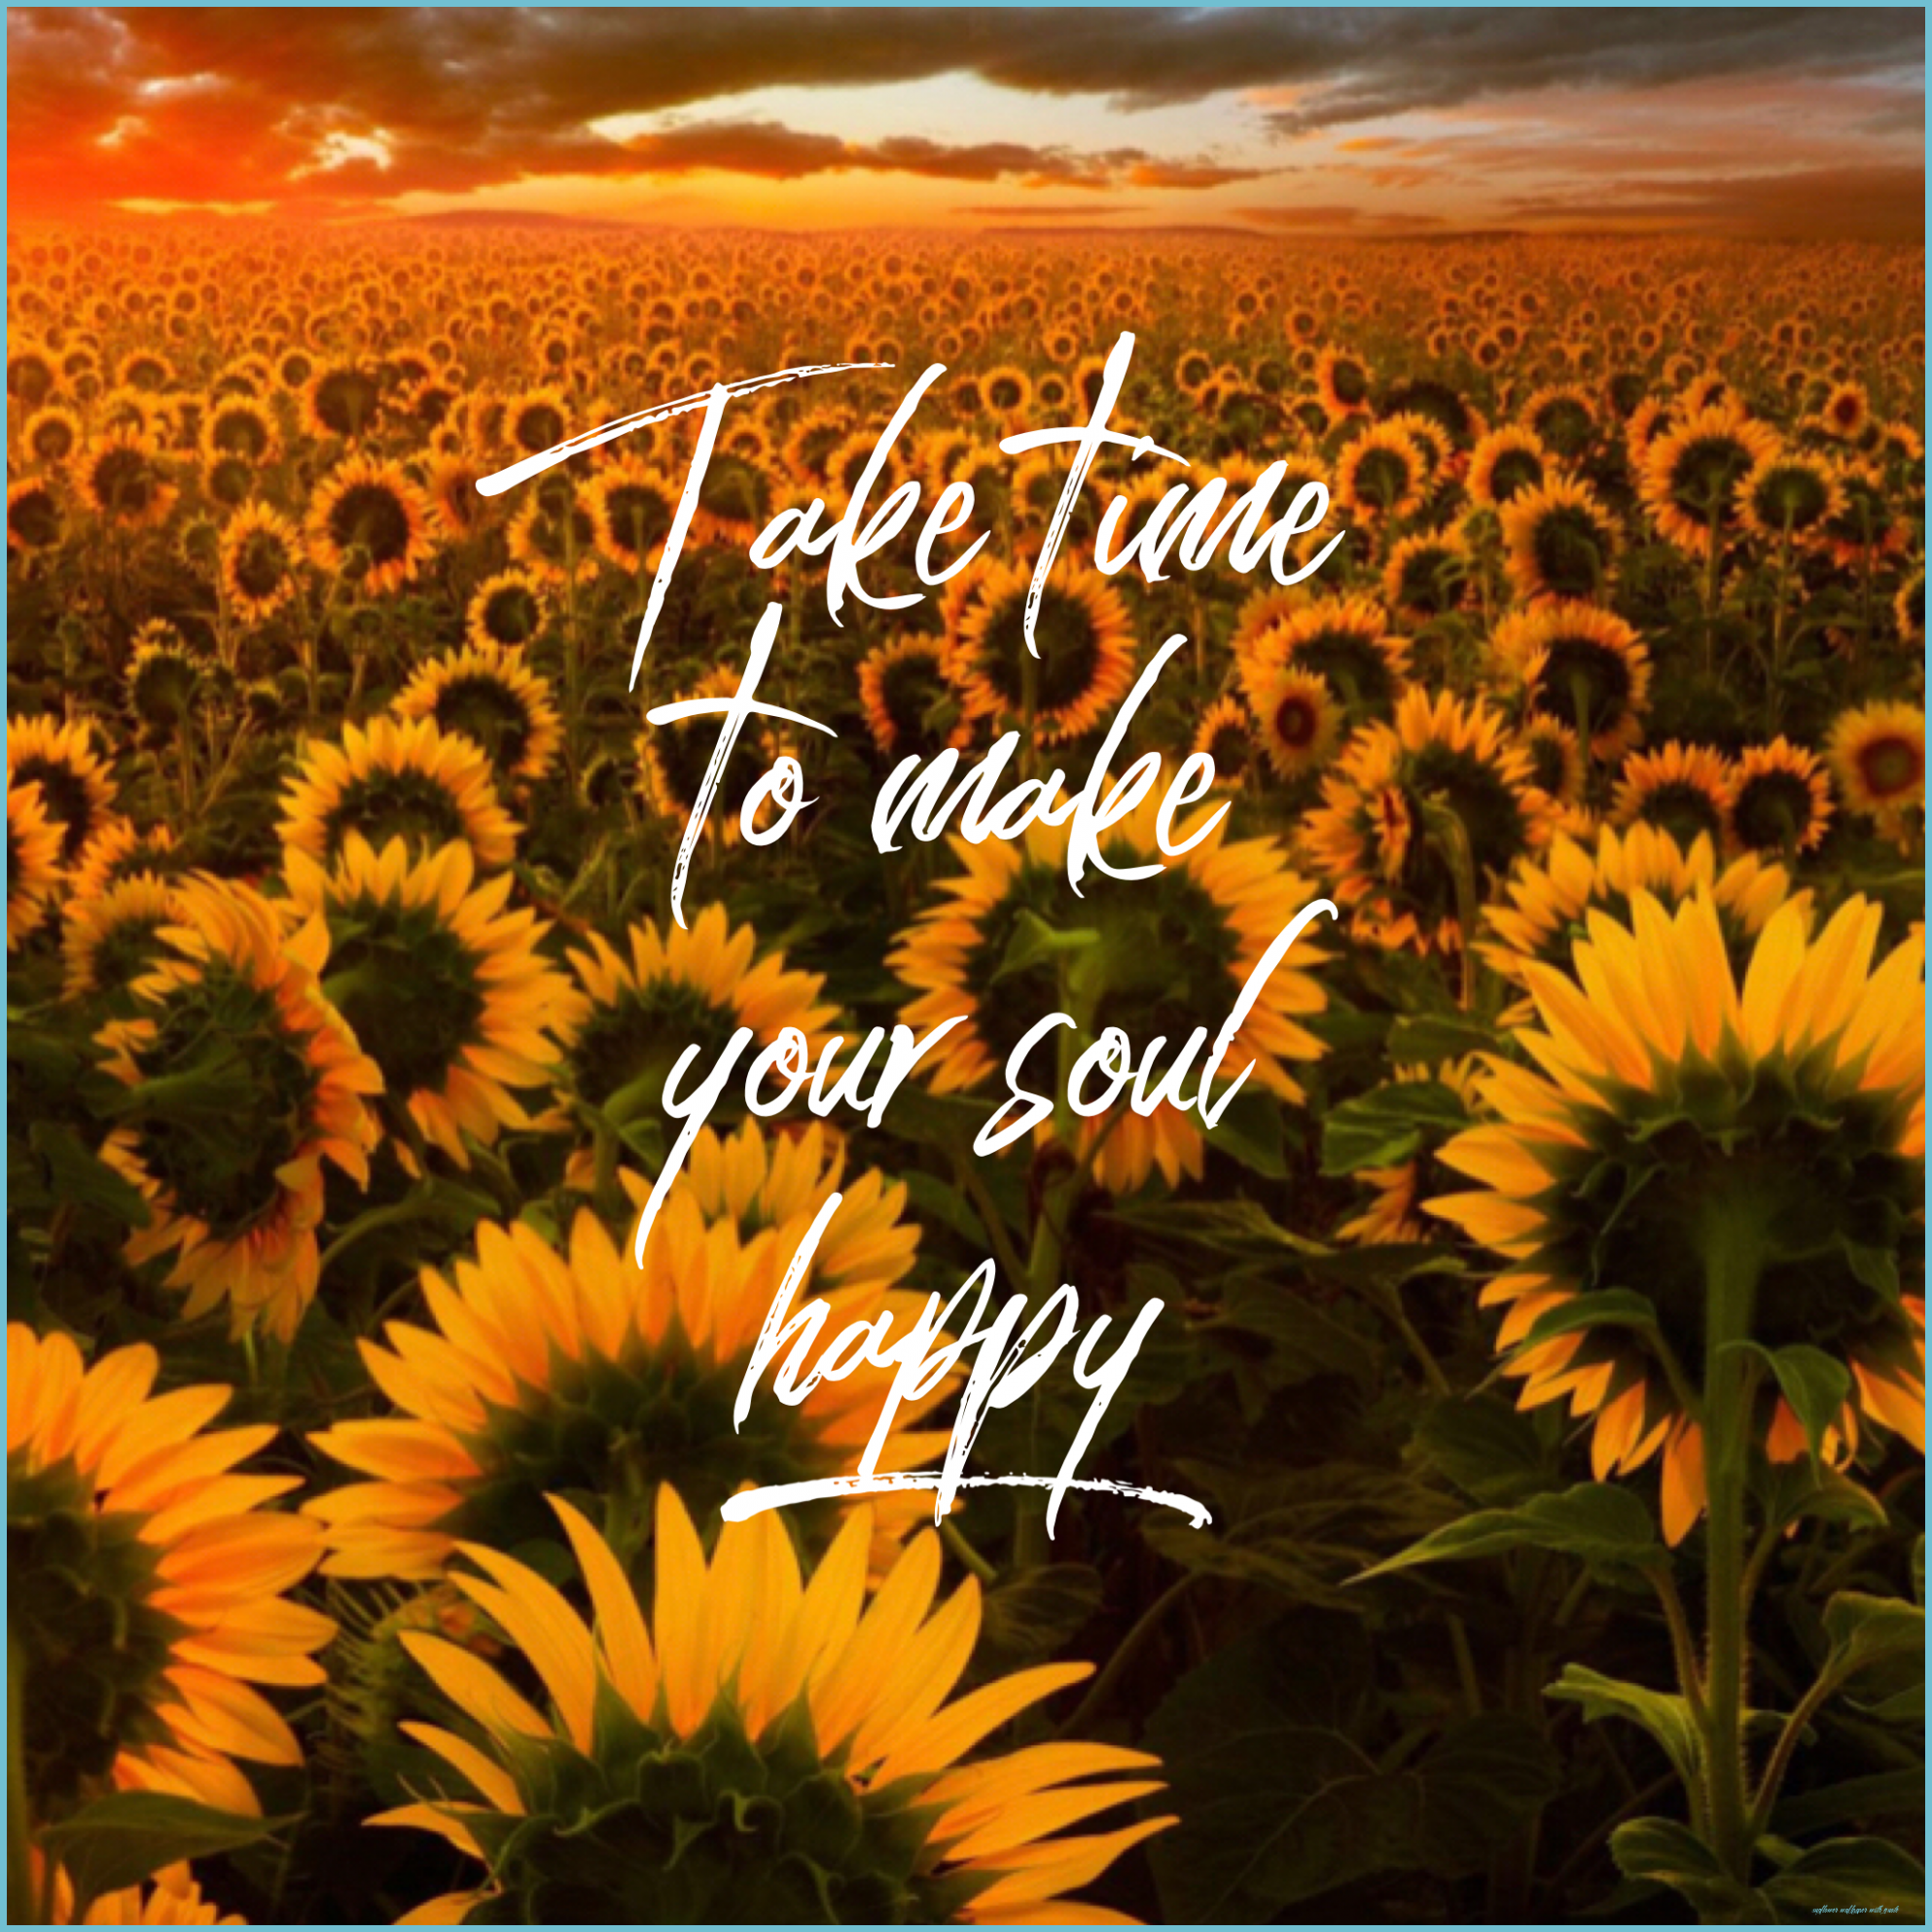 Sunflower Quotes Wallpaper Free Sunflower Quotes Wallpaper With Quote